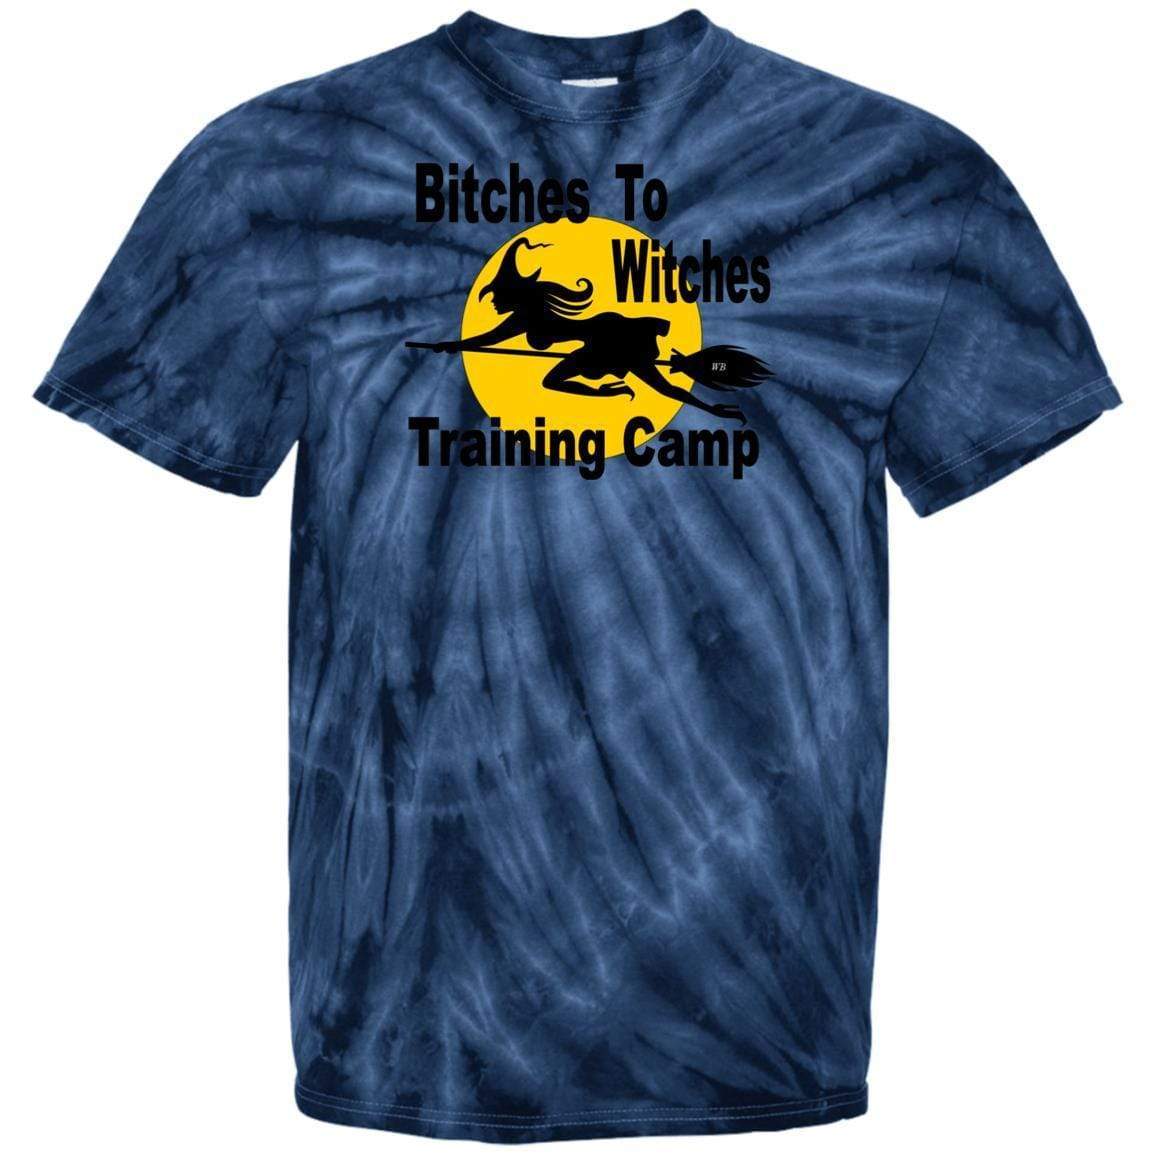 T-Shirts SpiderNavy / S WineyBitches.Co "Bitches To Witches Training Camp" - 100% Cotton Tie Dye T-Shirt WineyBitchesCo